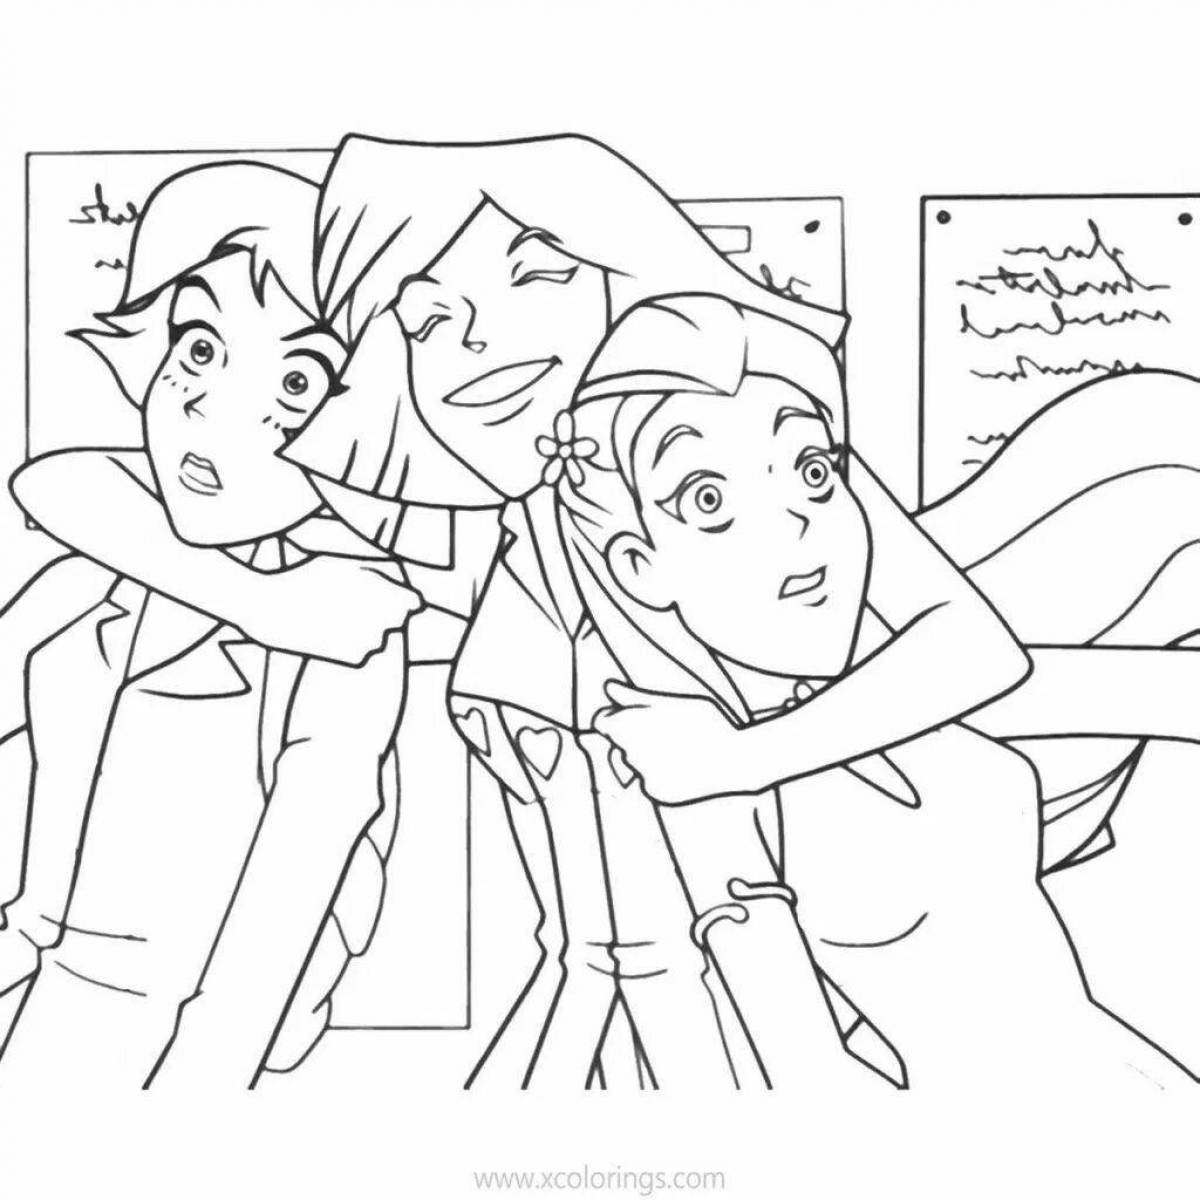 Colorful sam and sue coloring page